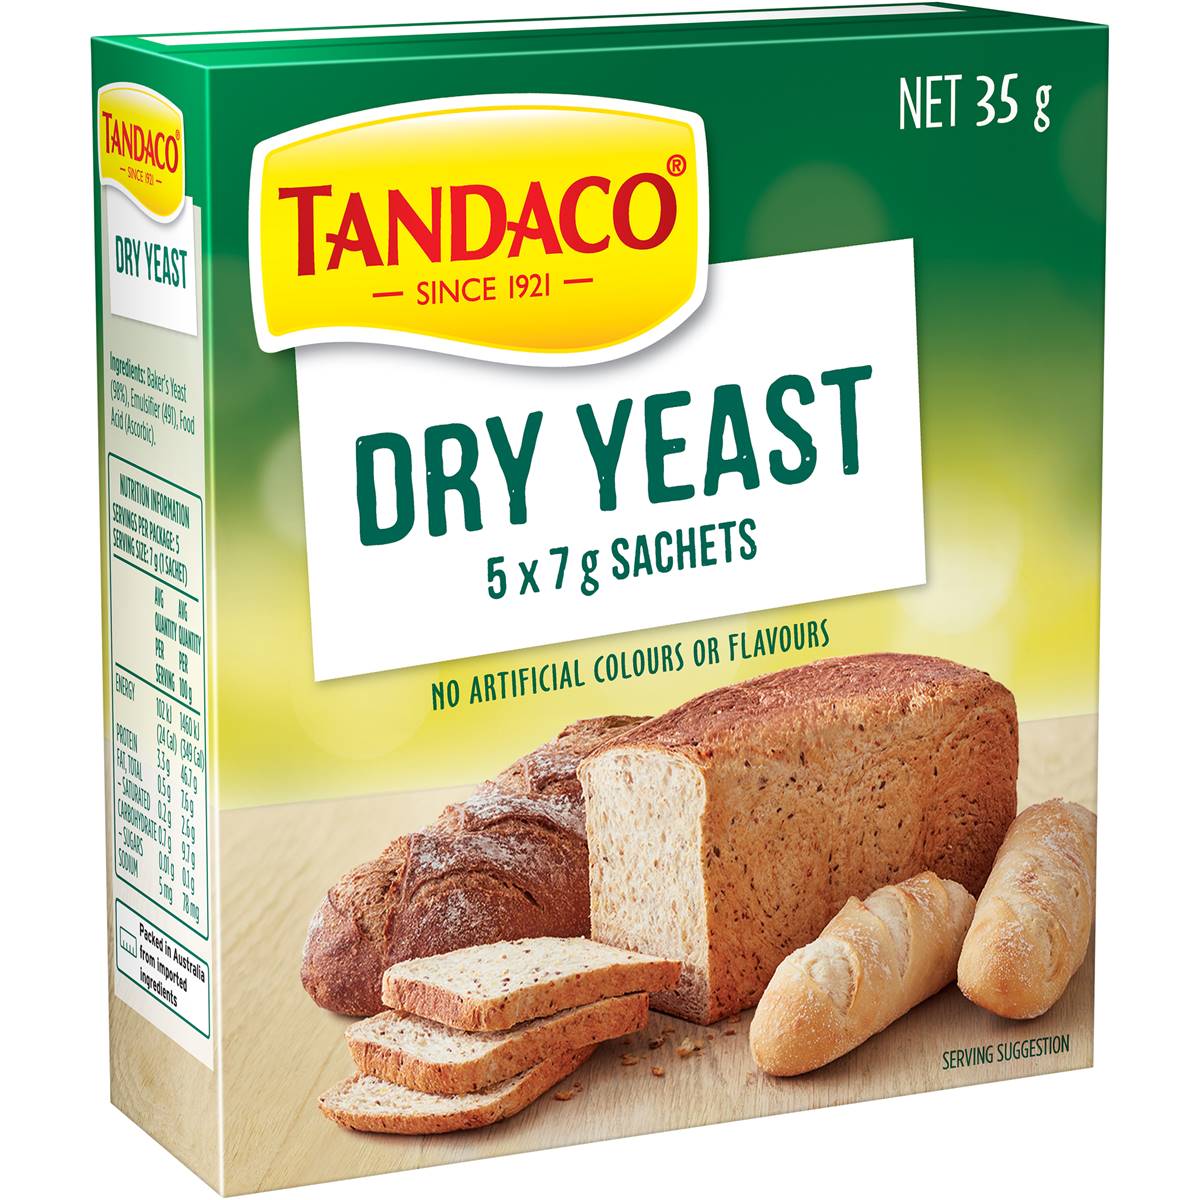 Calories in Tandaco Dry Yeast